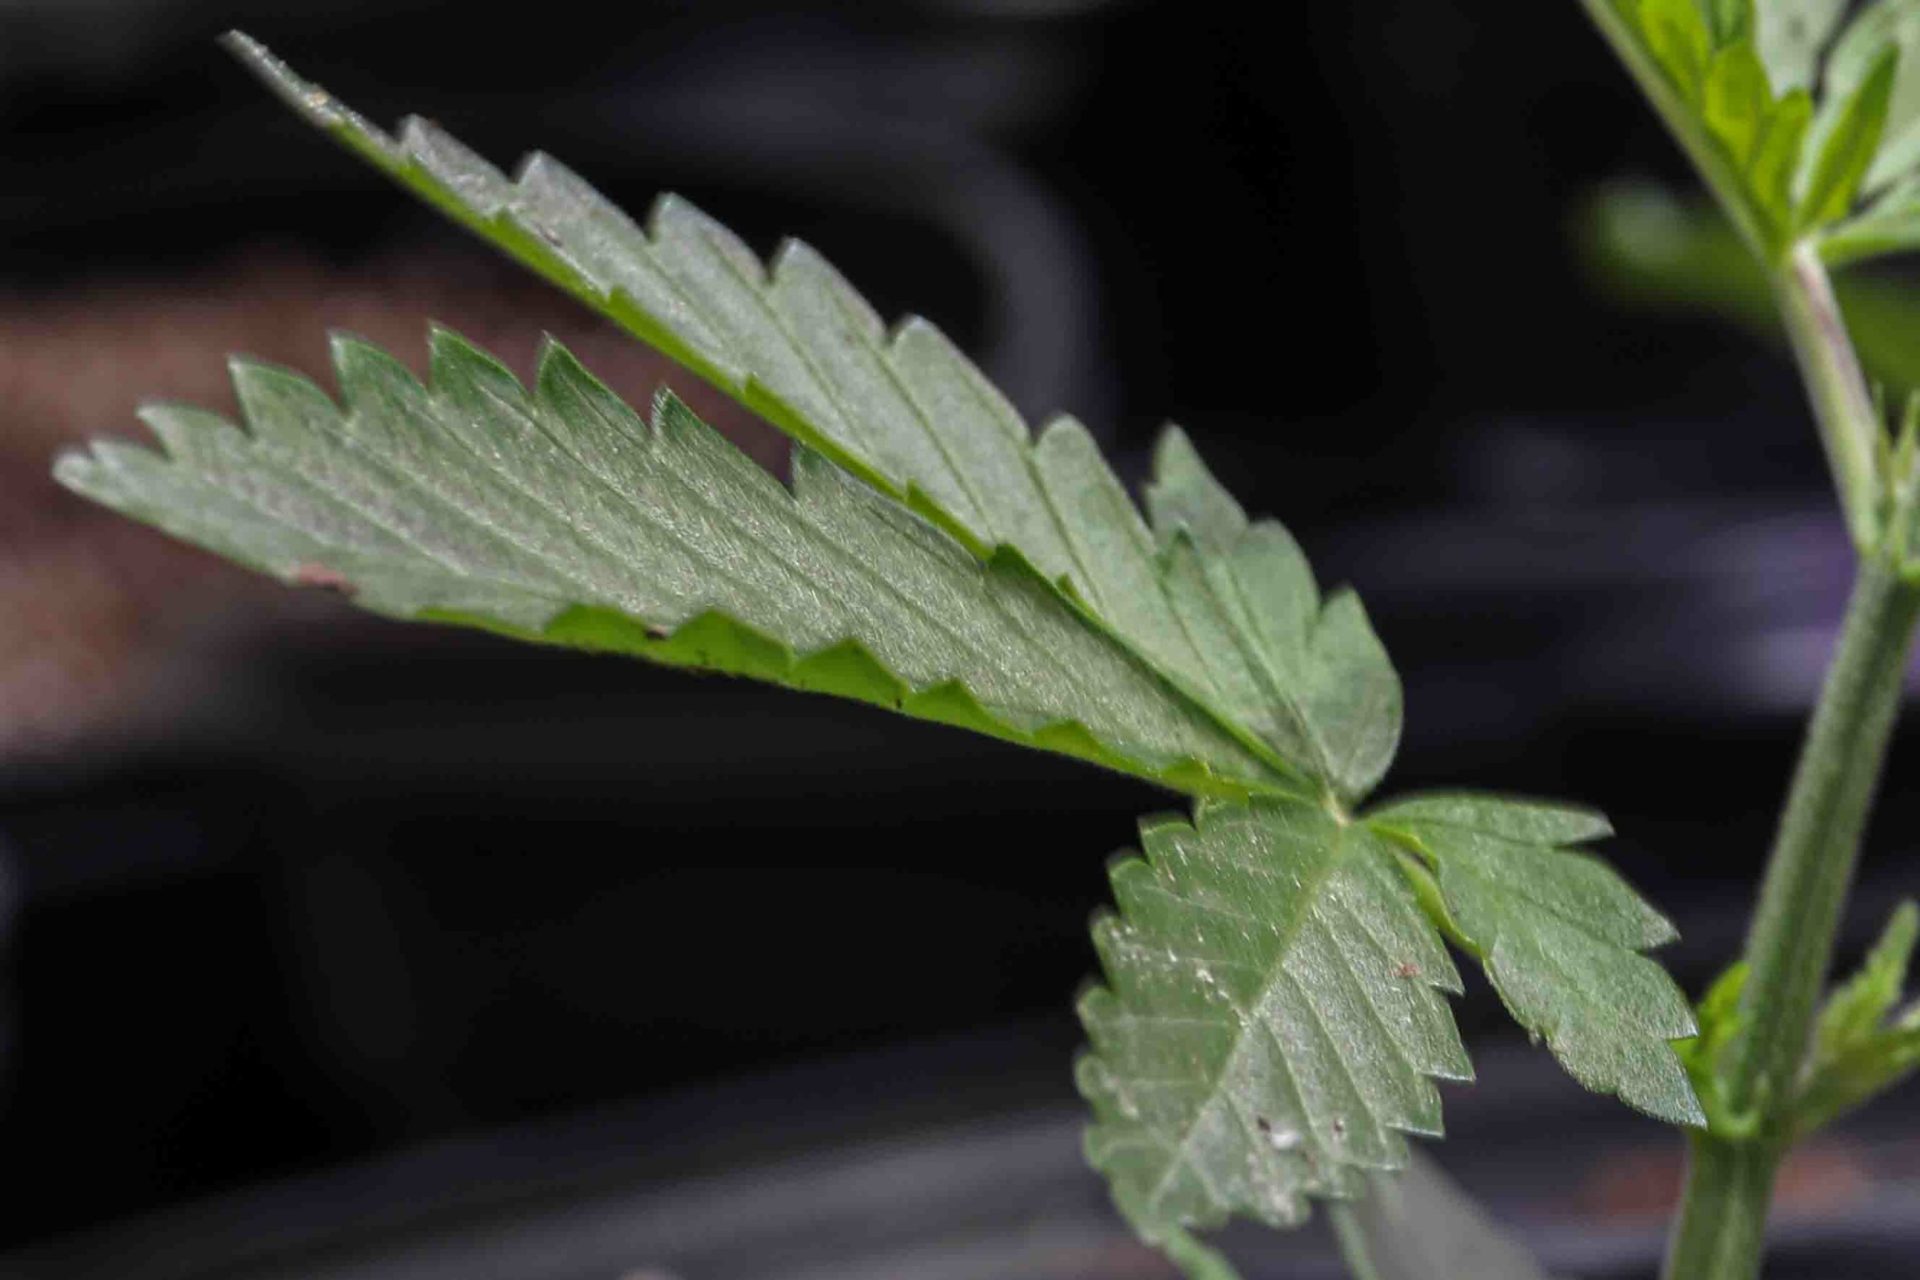 A close up view a hemp plant Monday, Feb. 03, 2020, at 302 Hemp Co. in Georgetown, Del.